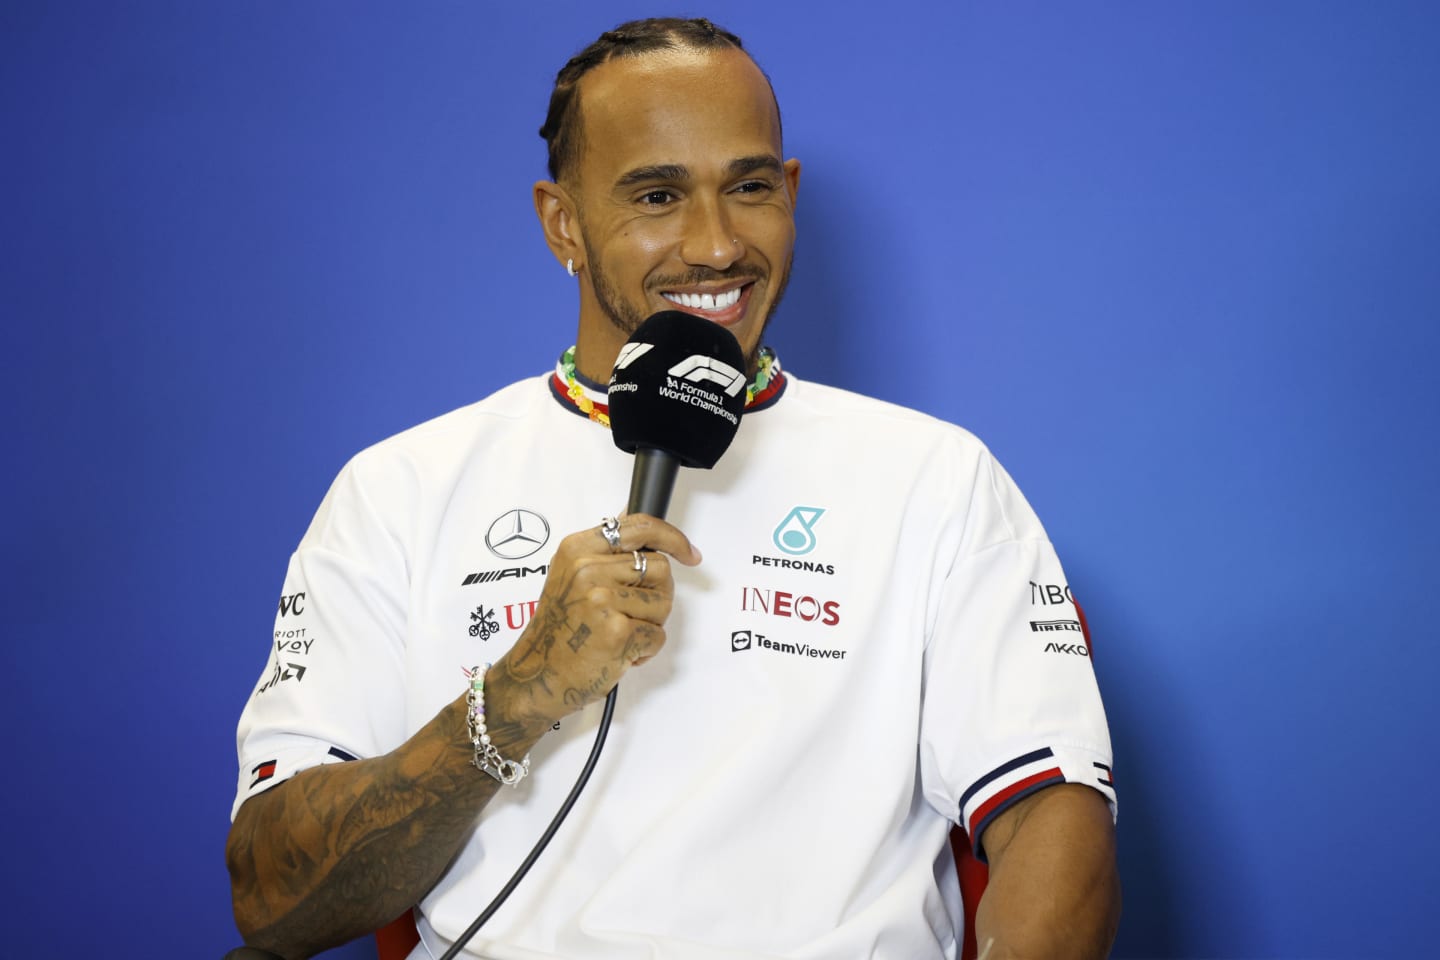 AUSTIN, TEXAS - OCTOBER 20: Lewis Hamilton of Great Britain and Mercedes attends the Drivers Press Conference during previews ahead of the F1 Grand Prix of USA at Circuit of The Americas on October 20, 2022 in Austin, Texas. (Photo by Jared C. Tilton/Getty Images)